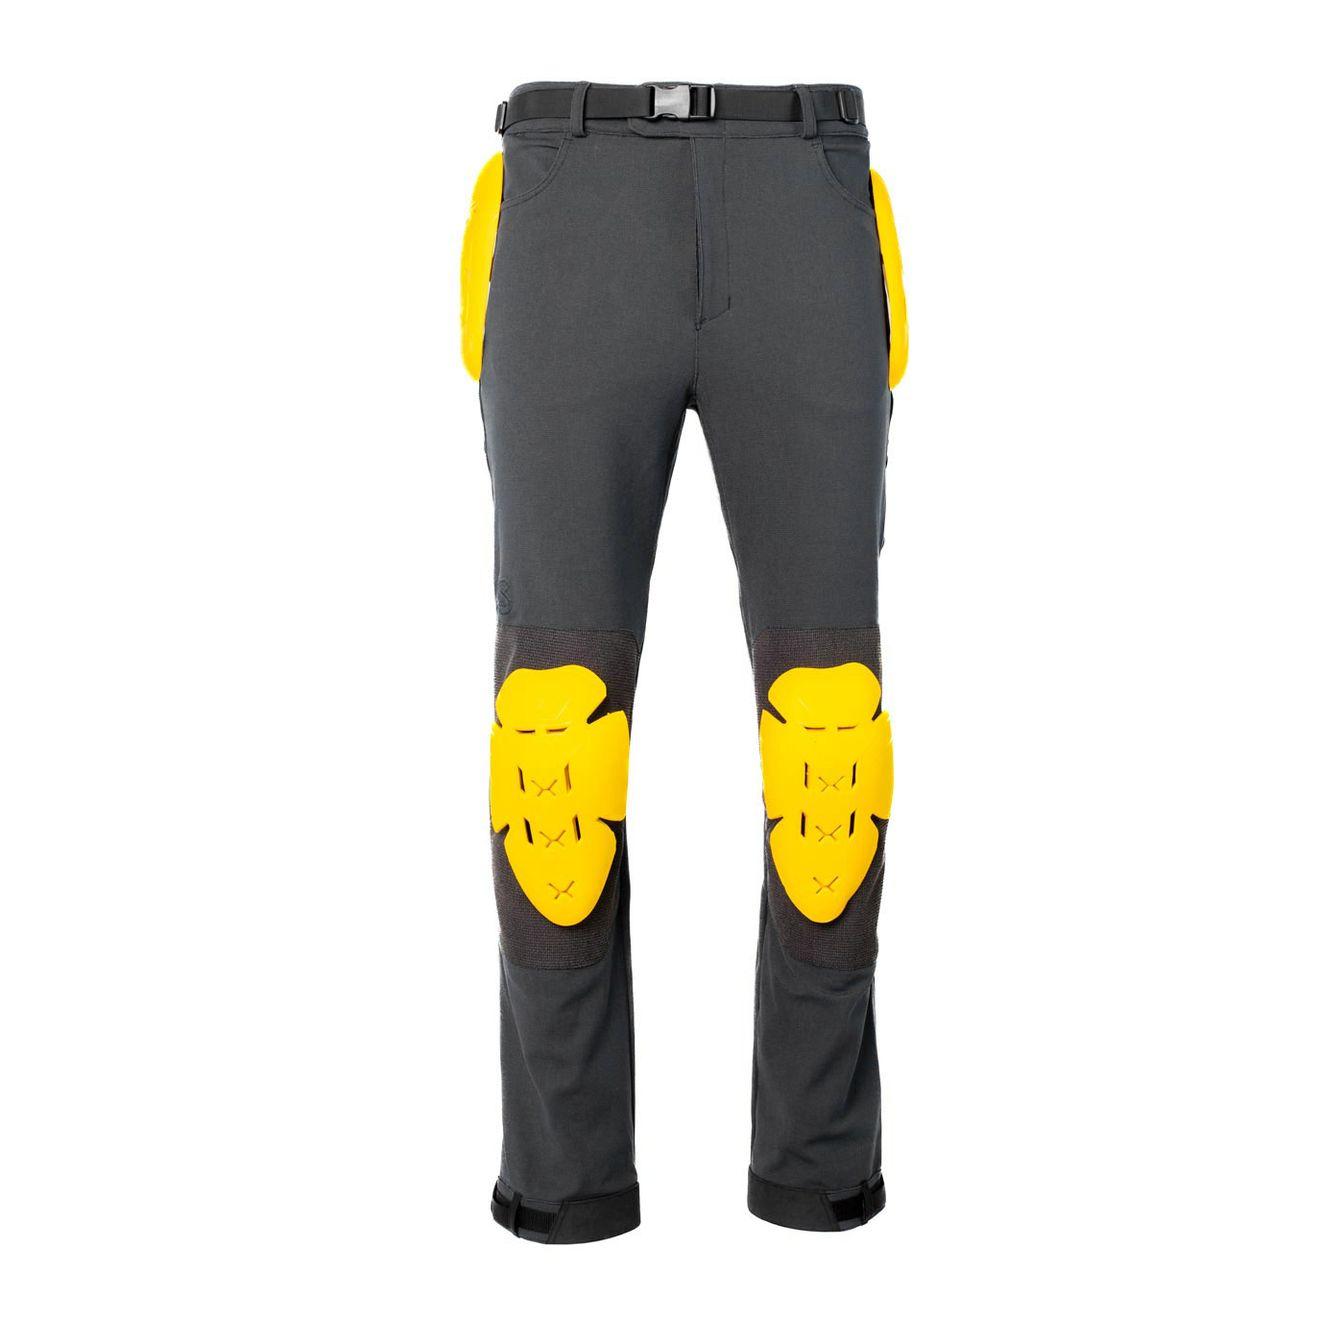 adventure spec the linesman pant black adv motorcycle trousers motorbike hiking trouser  with armor